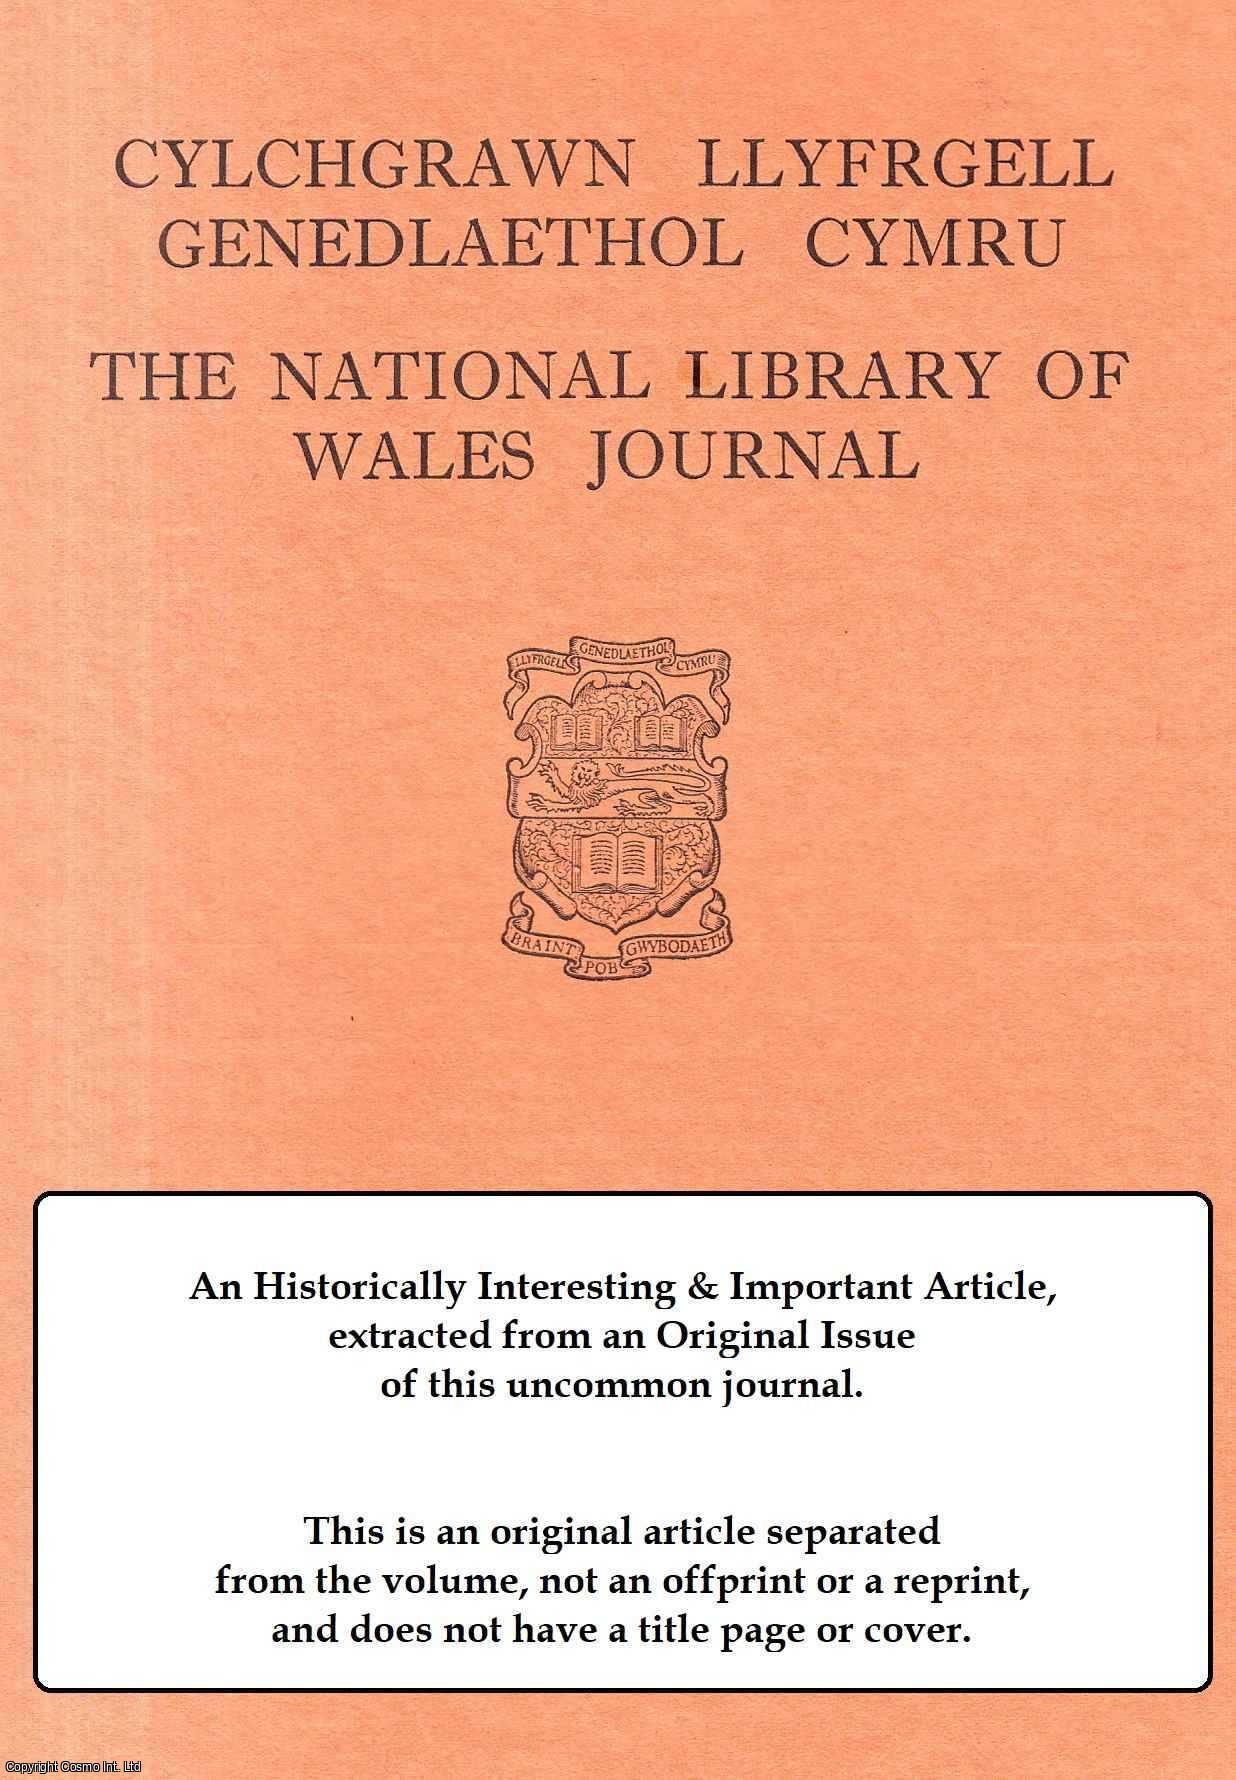 E. D. Jones - The Book of Llandaff. An original article from The National Library of Wales Journal, 1946.